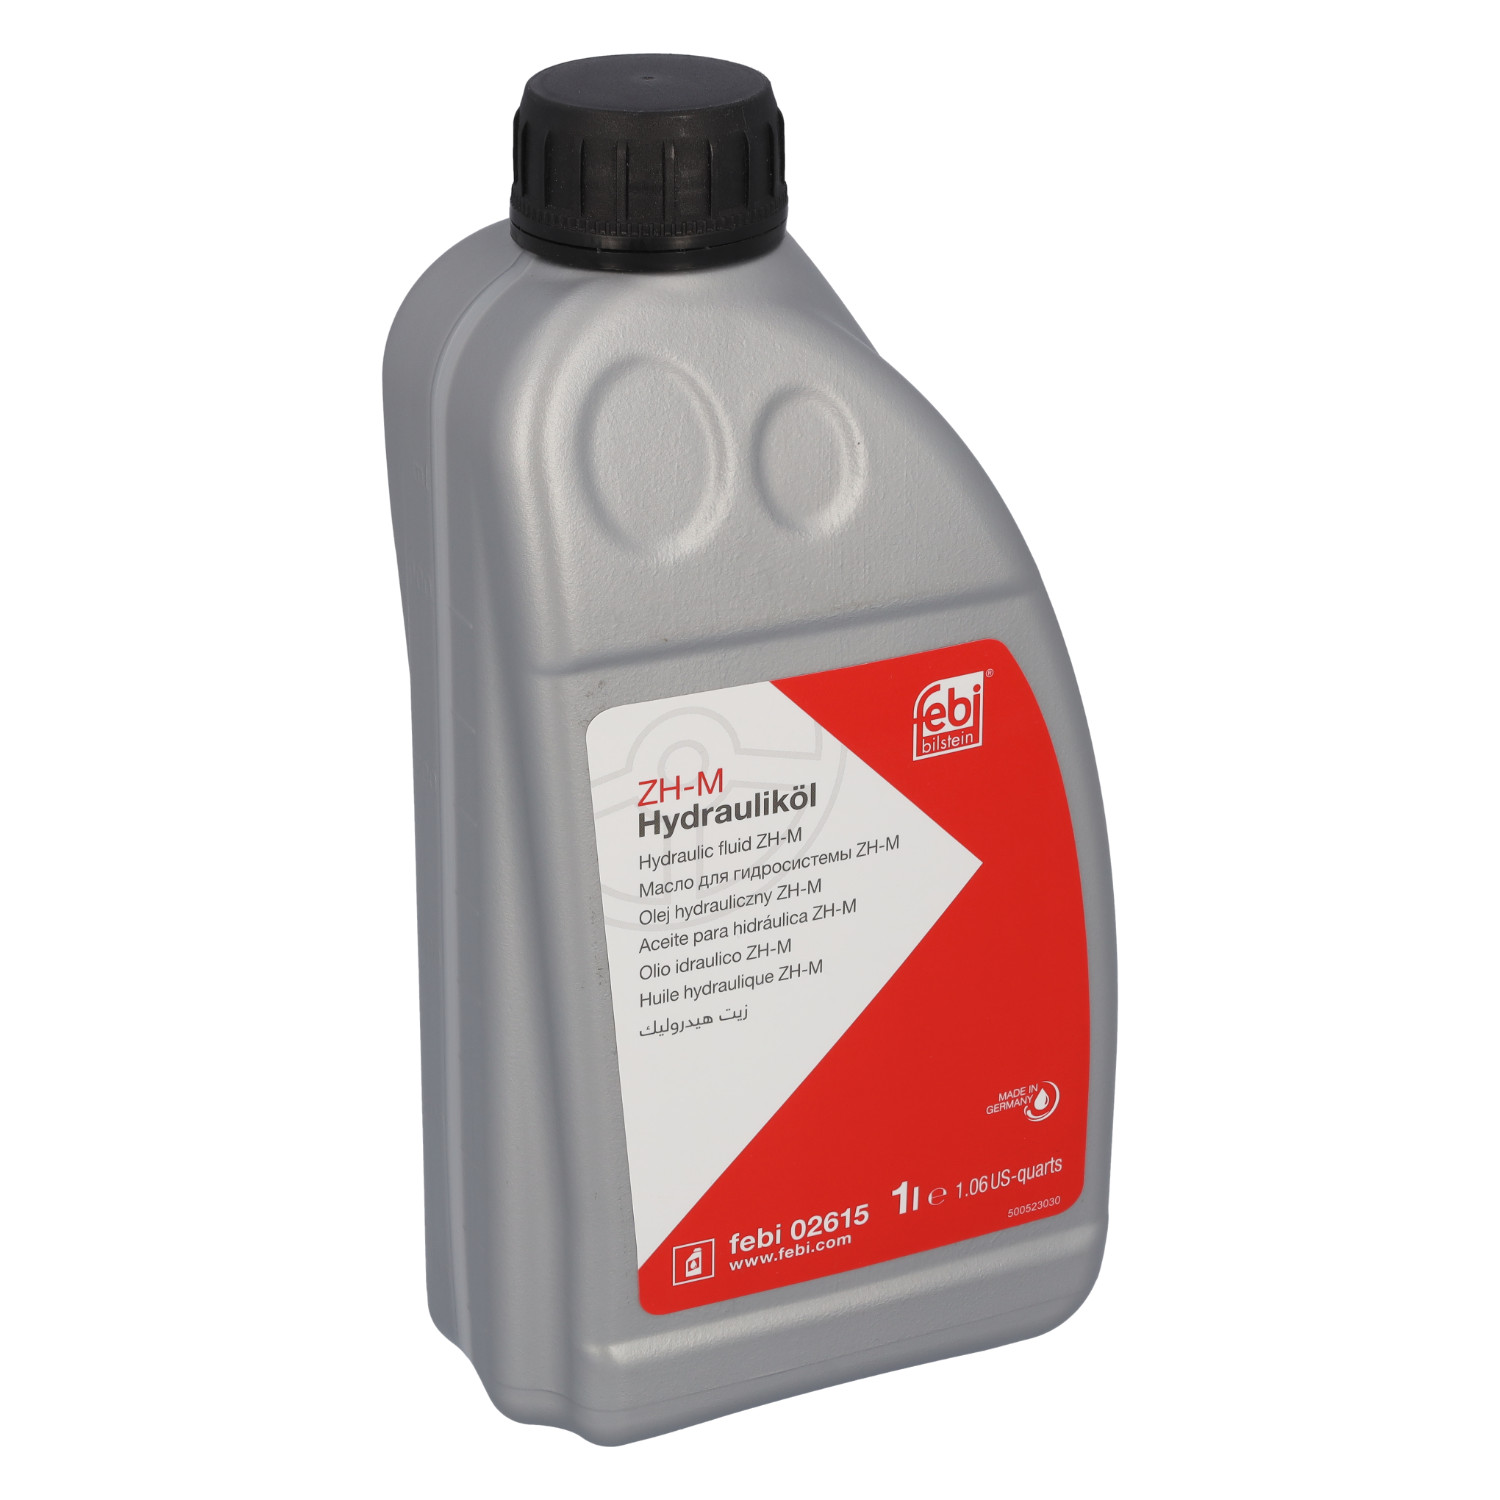 febi bilstein 02615 Hydraulic Fluid for hydropneumatic Suspension and Level  Control System, Pack of one